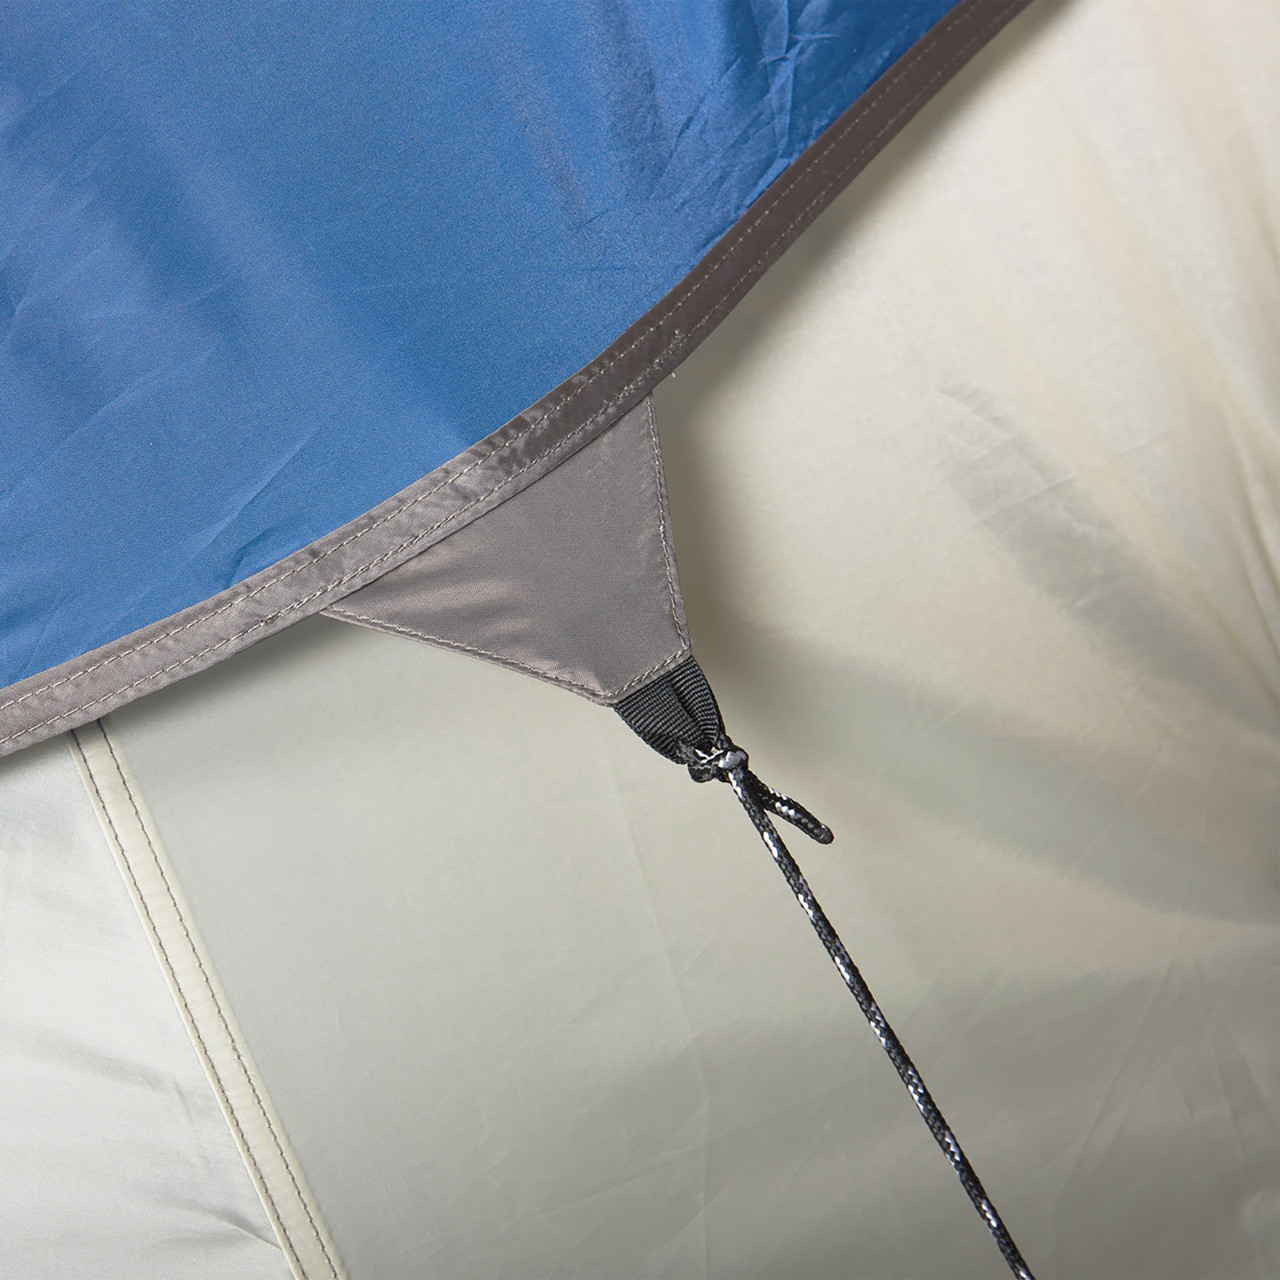 Wenzel Pinyon 10 Person Dome Tent, blue/white, showing guyline attachment point